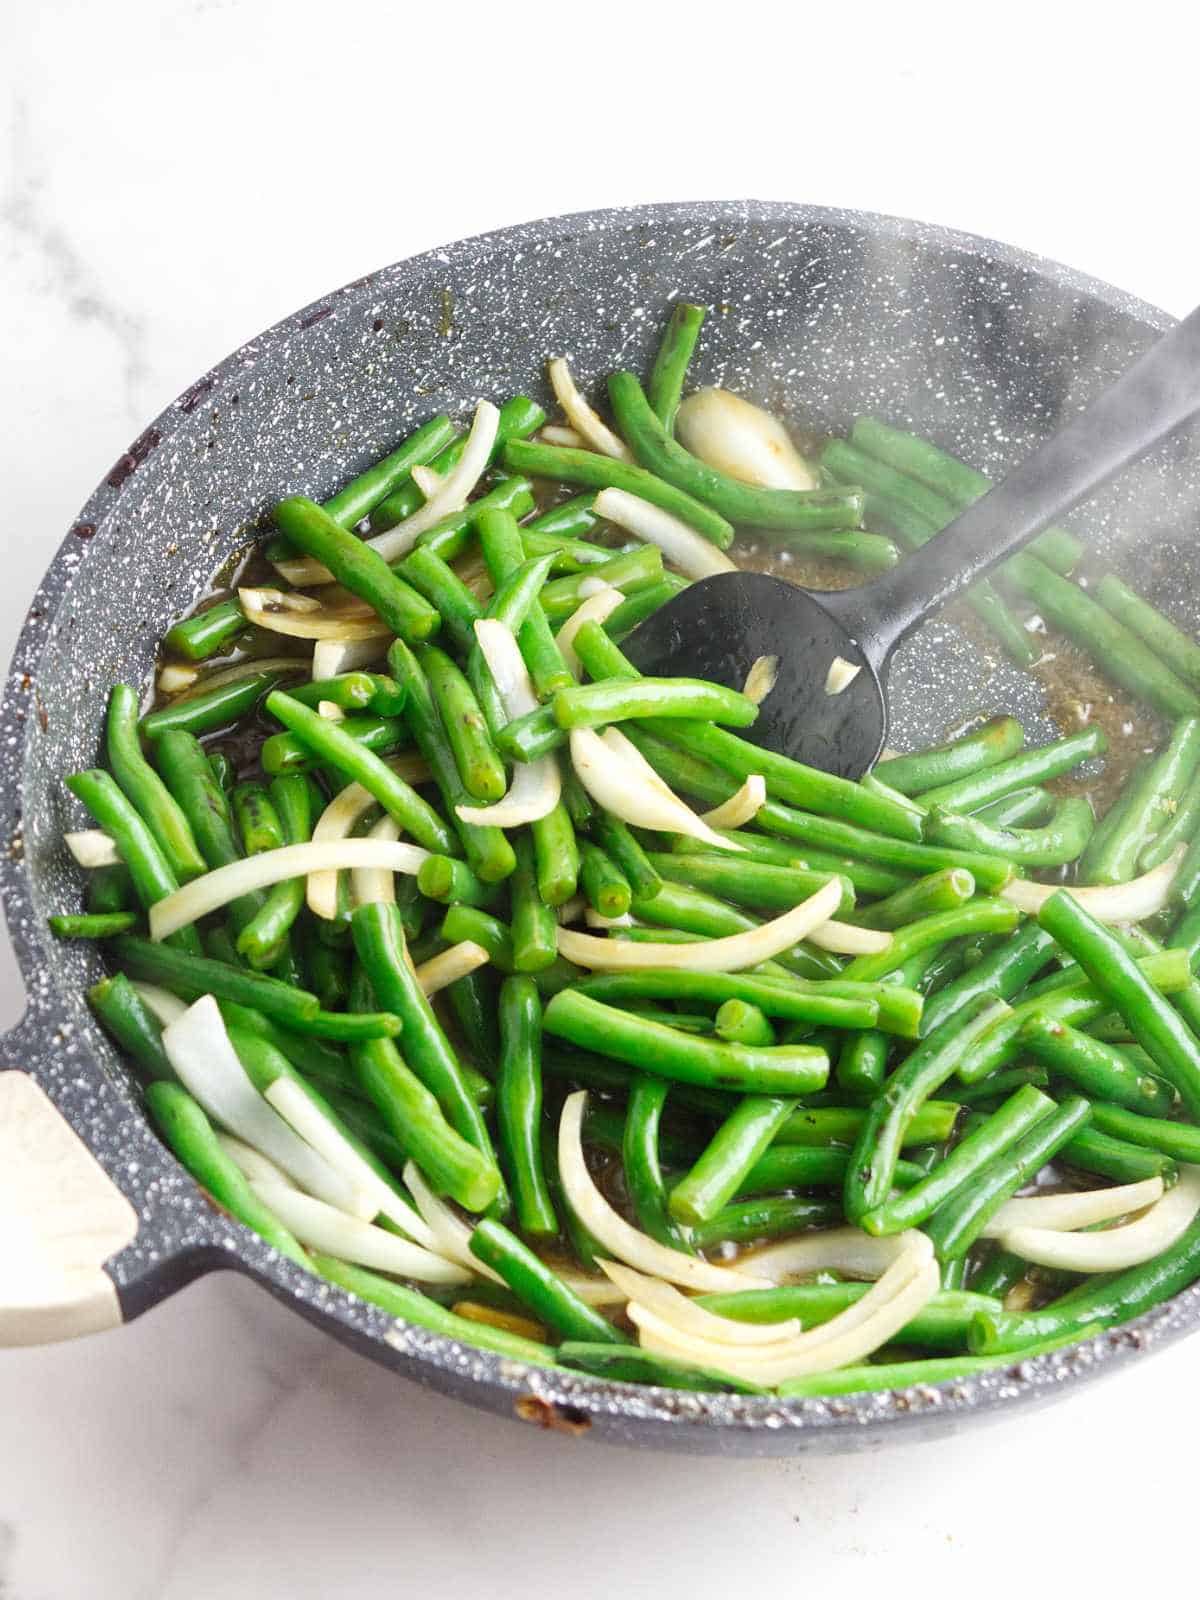 green beans and slivered onion in a skillet getting sauteed.